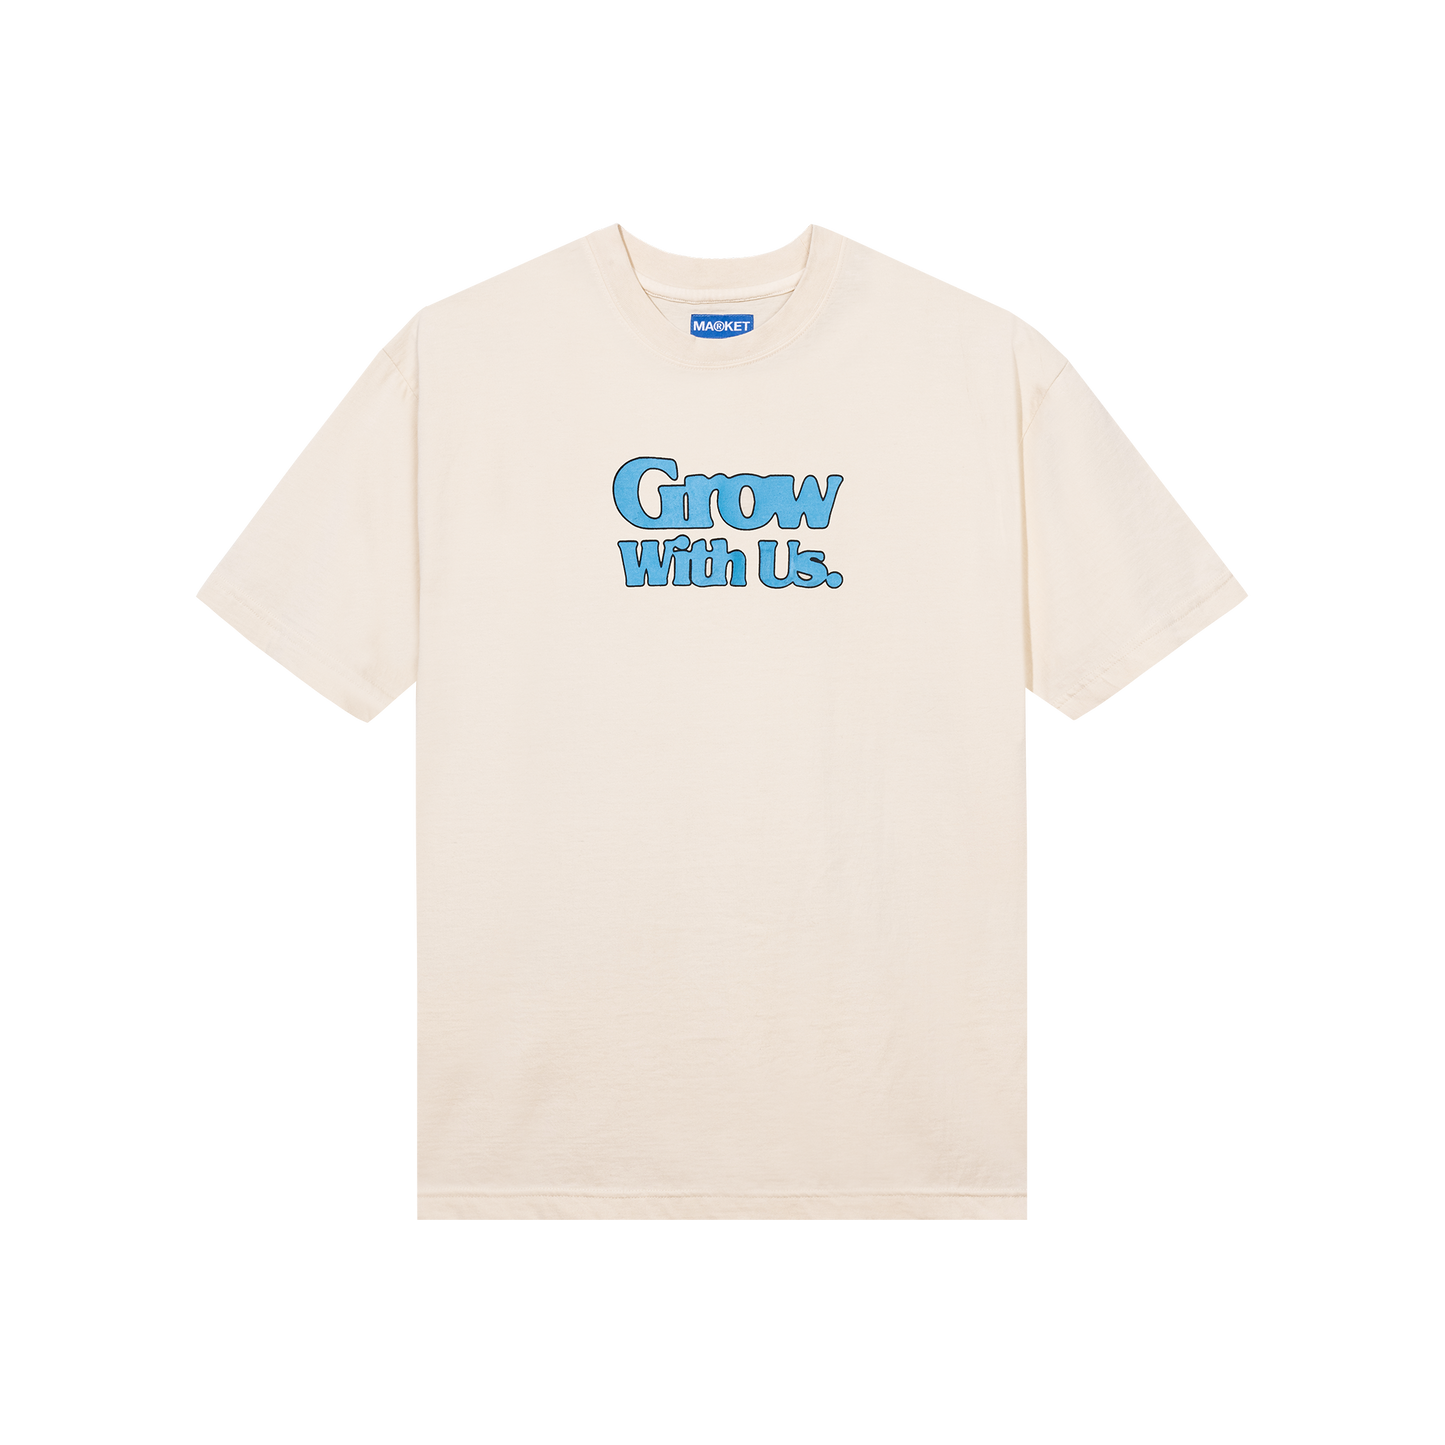 GROW WITH US T-SHIRT